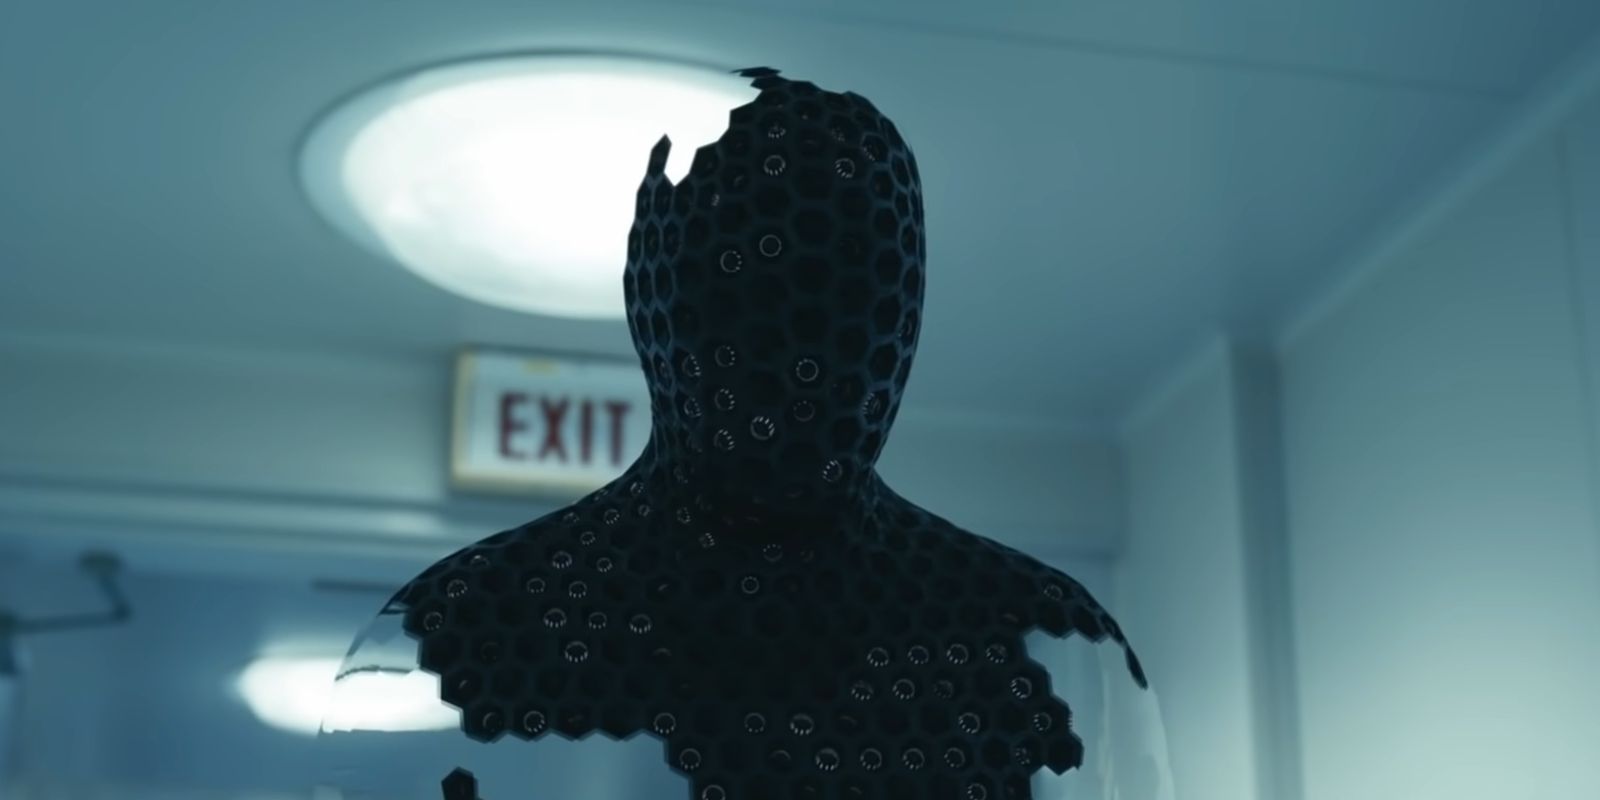 The invisible suit malfunctions in The Invisible Man (2020)